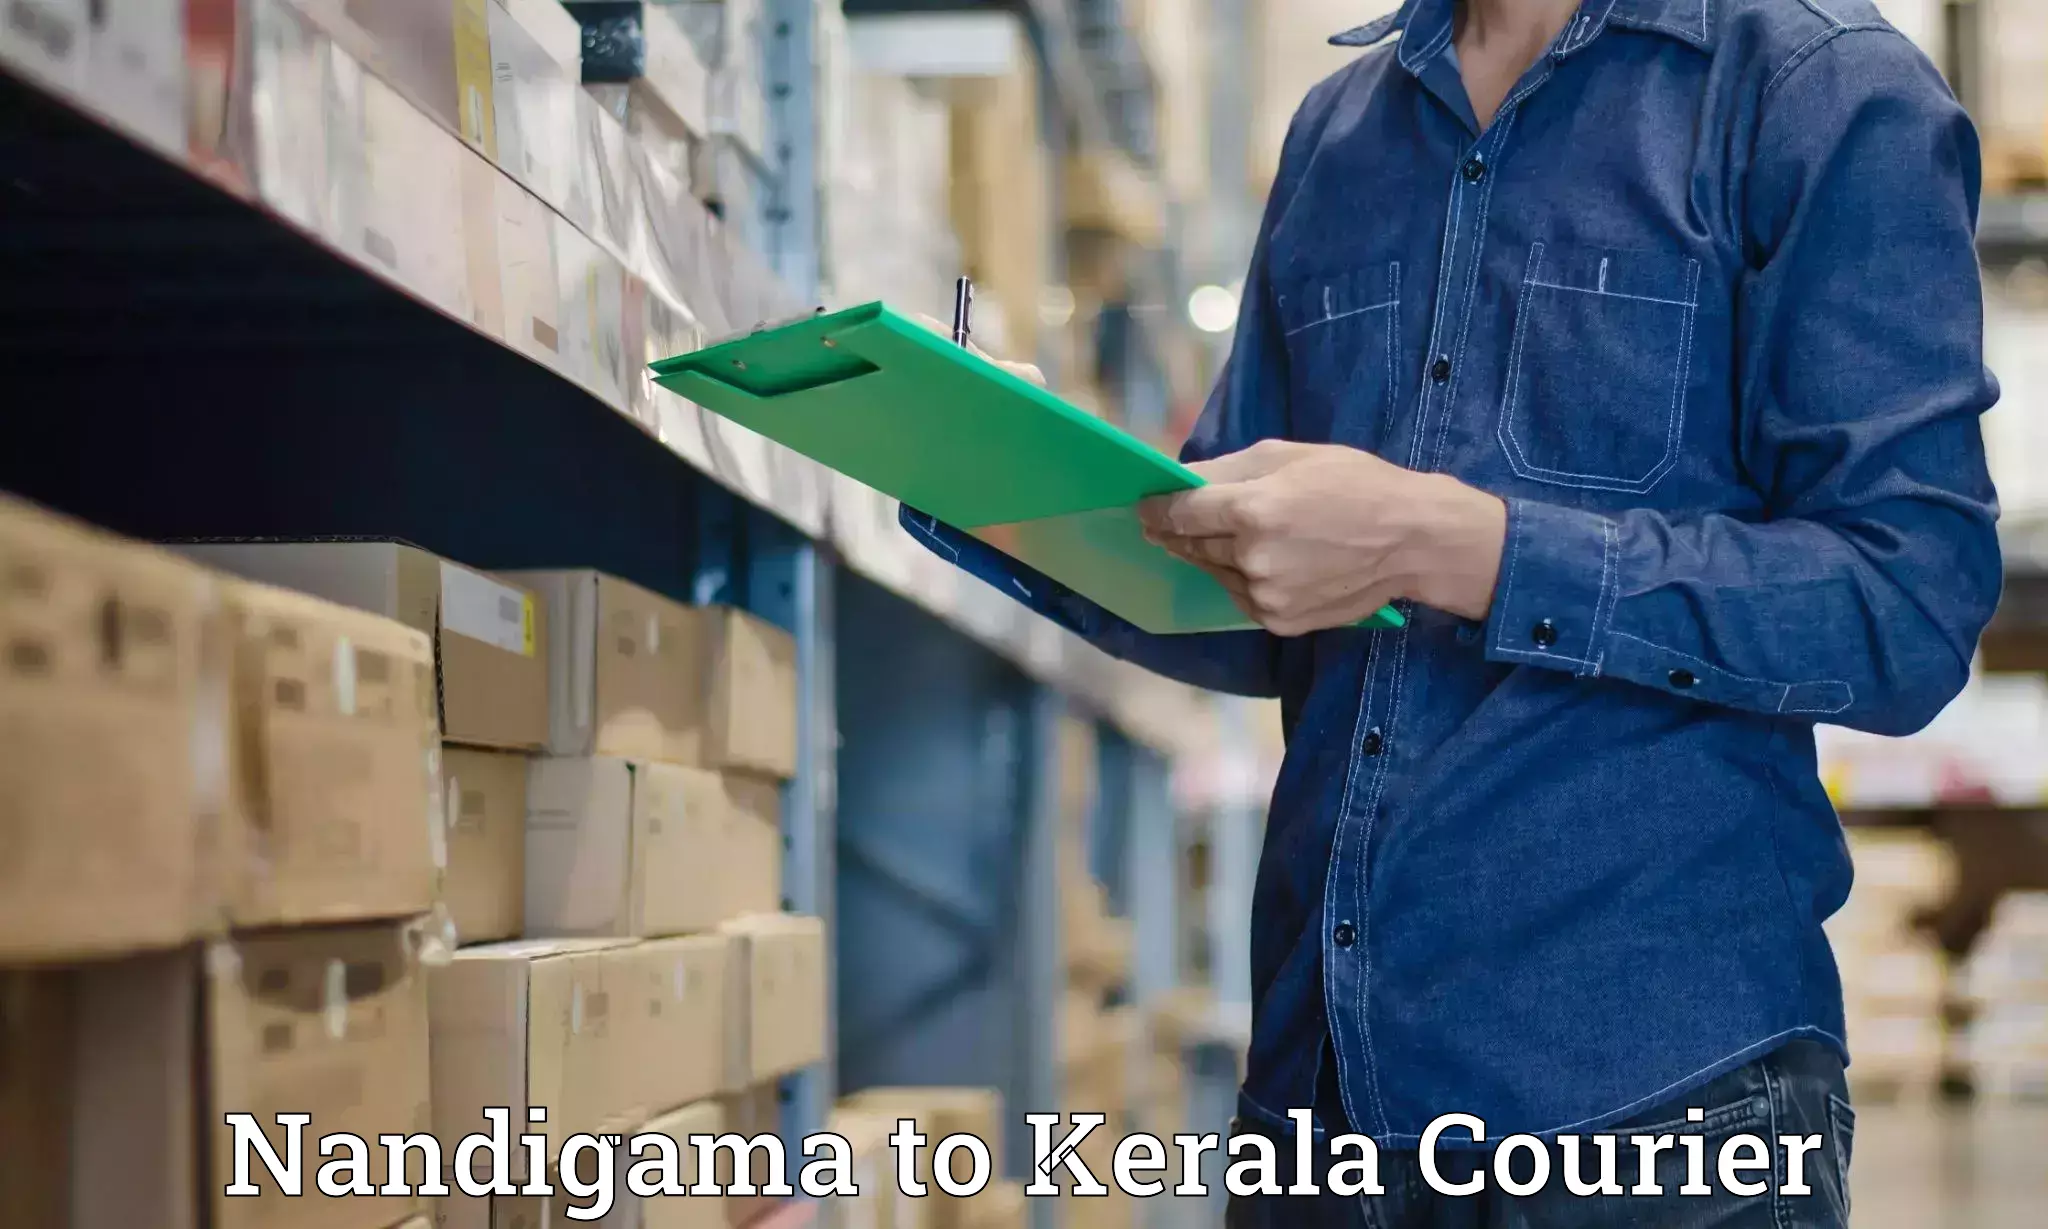 Courier service comparison Nandigama to Mananthavady